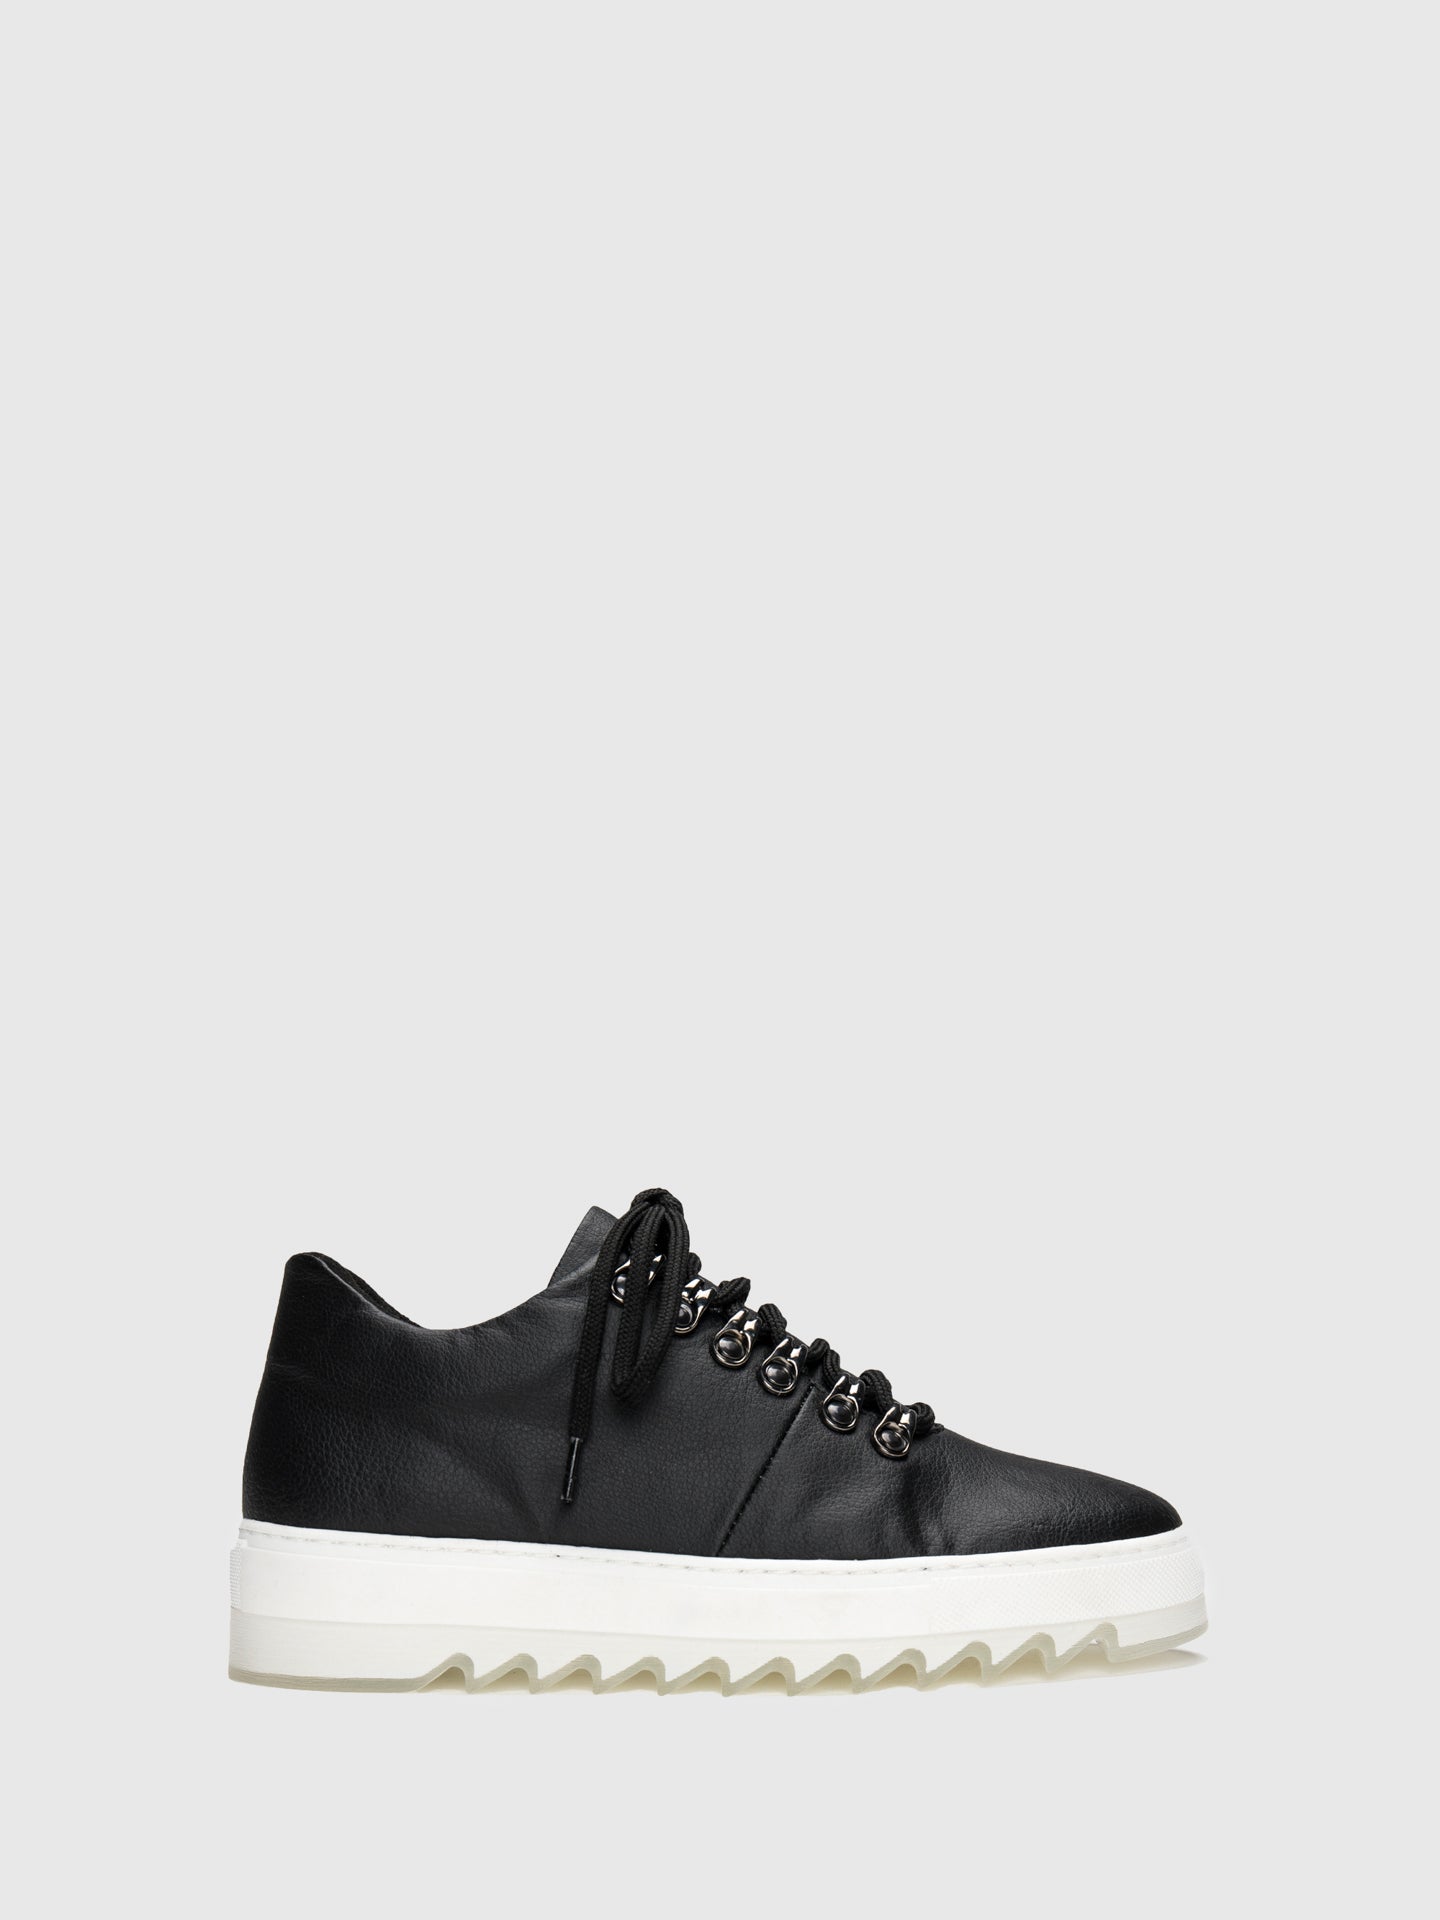 NAE Vegan Shoes Black Lace-up Trainers